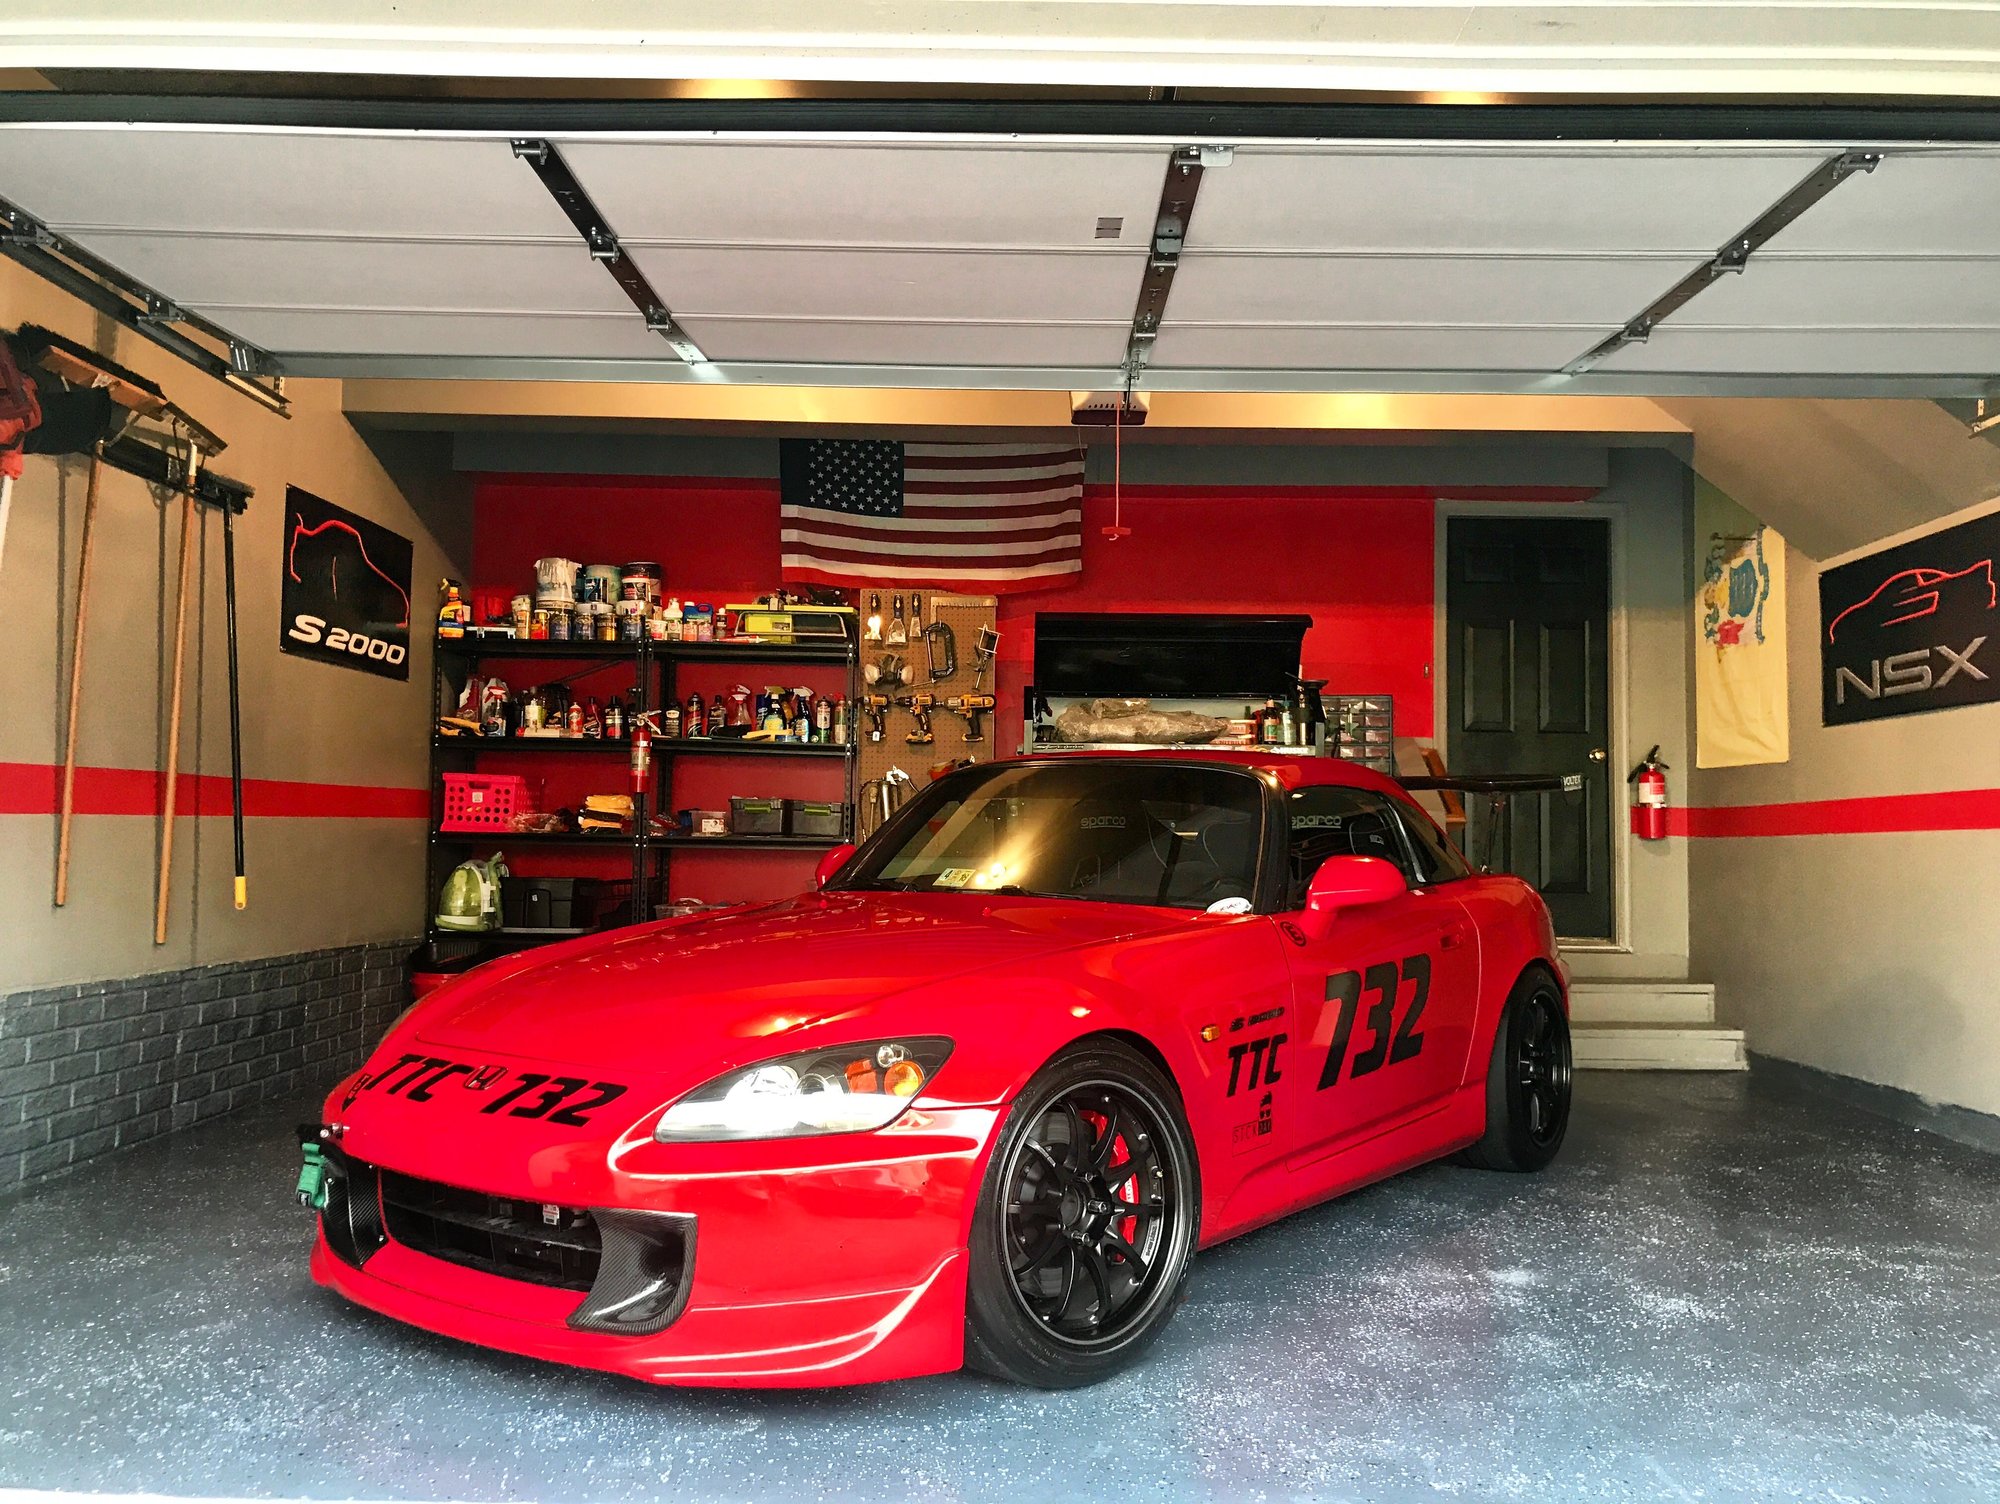 An S2000 track build that's comfortable enough to drive to the track.